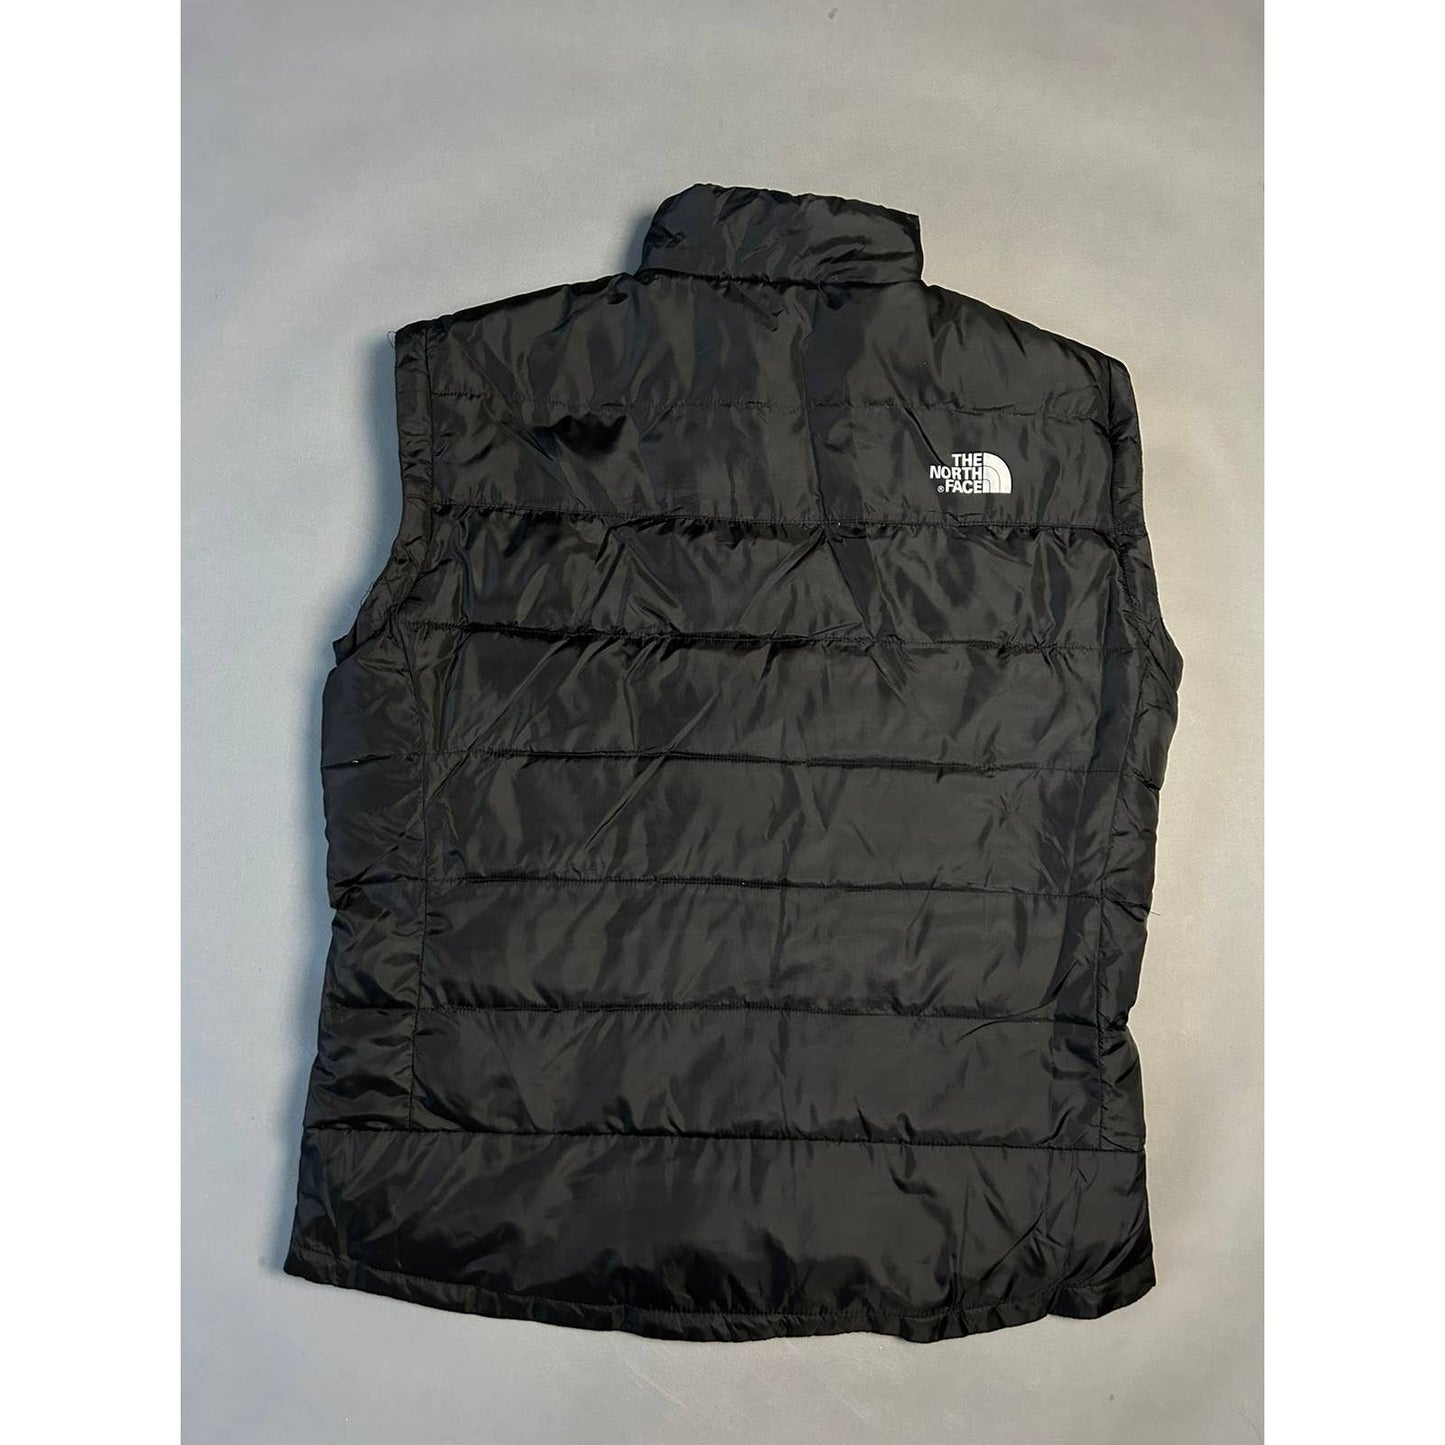 The North Face puffer jacket / vest reversible 900